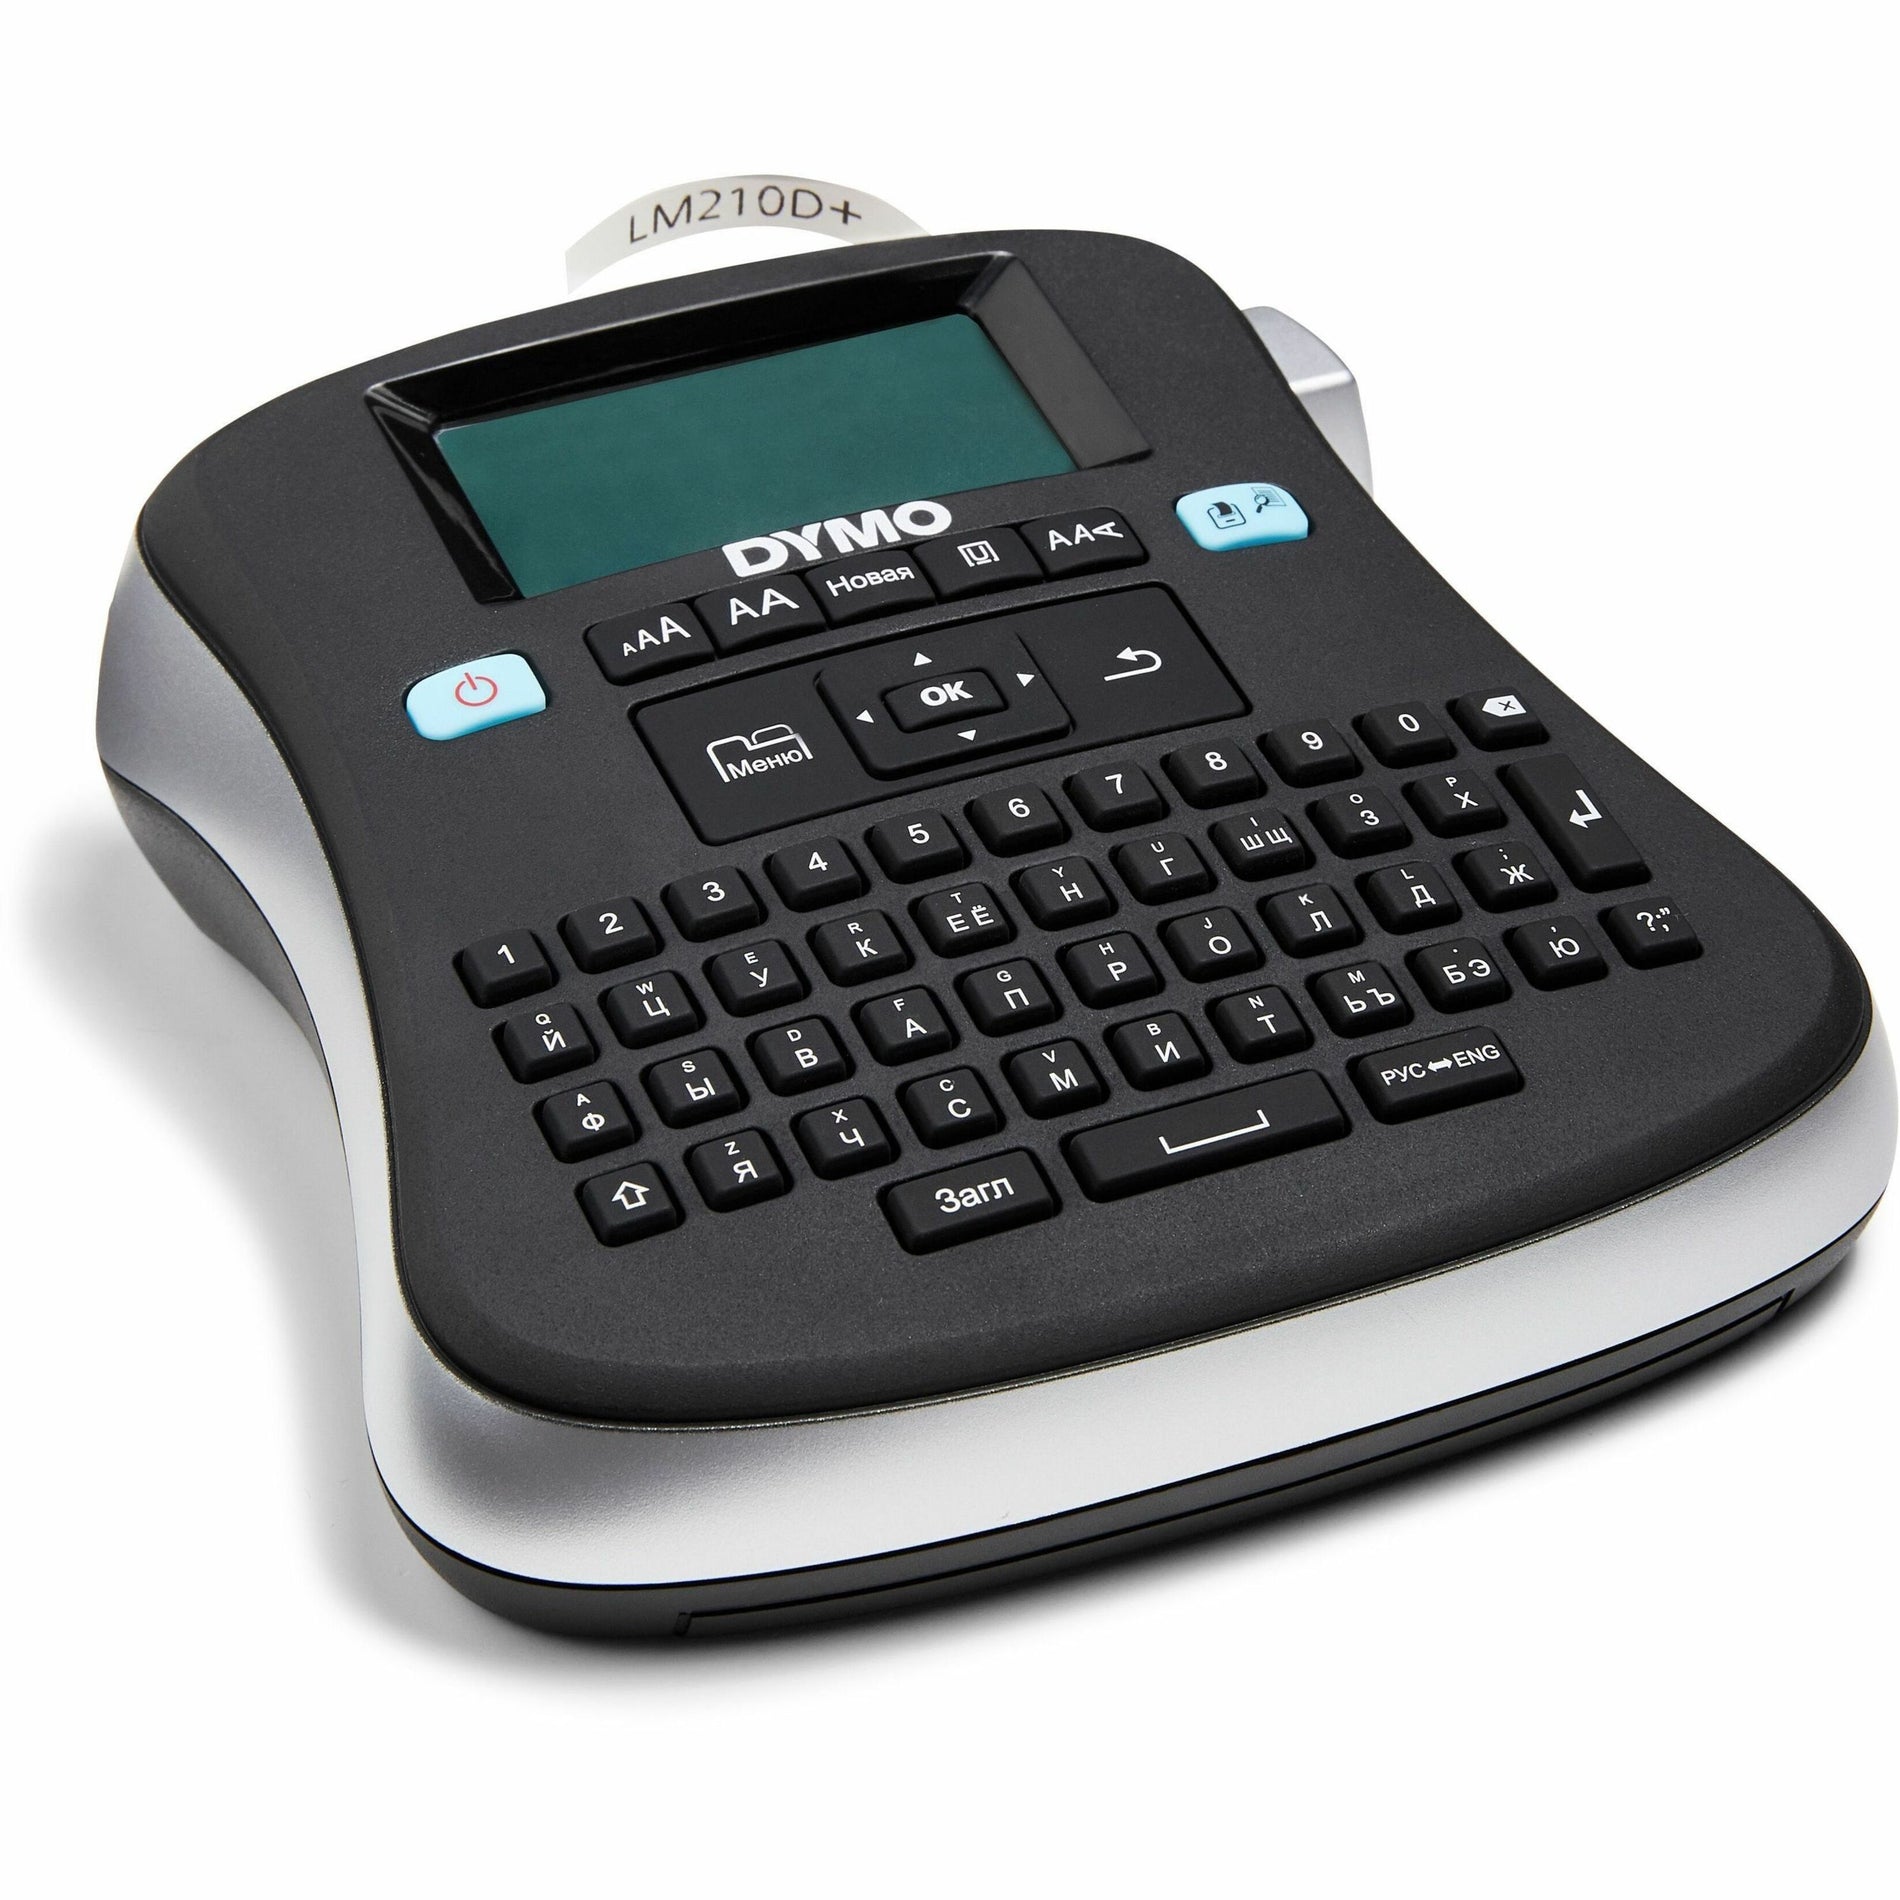 Dymo 2175085 LabelManager 210D All-Purpose Label Maker, Portable, Internal Memory, Save Text, English Layout Keyboard